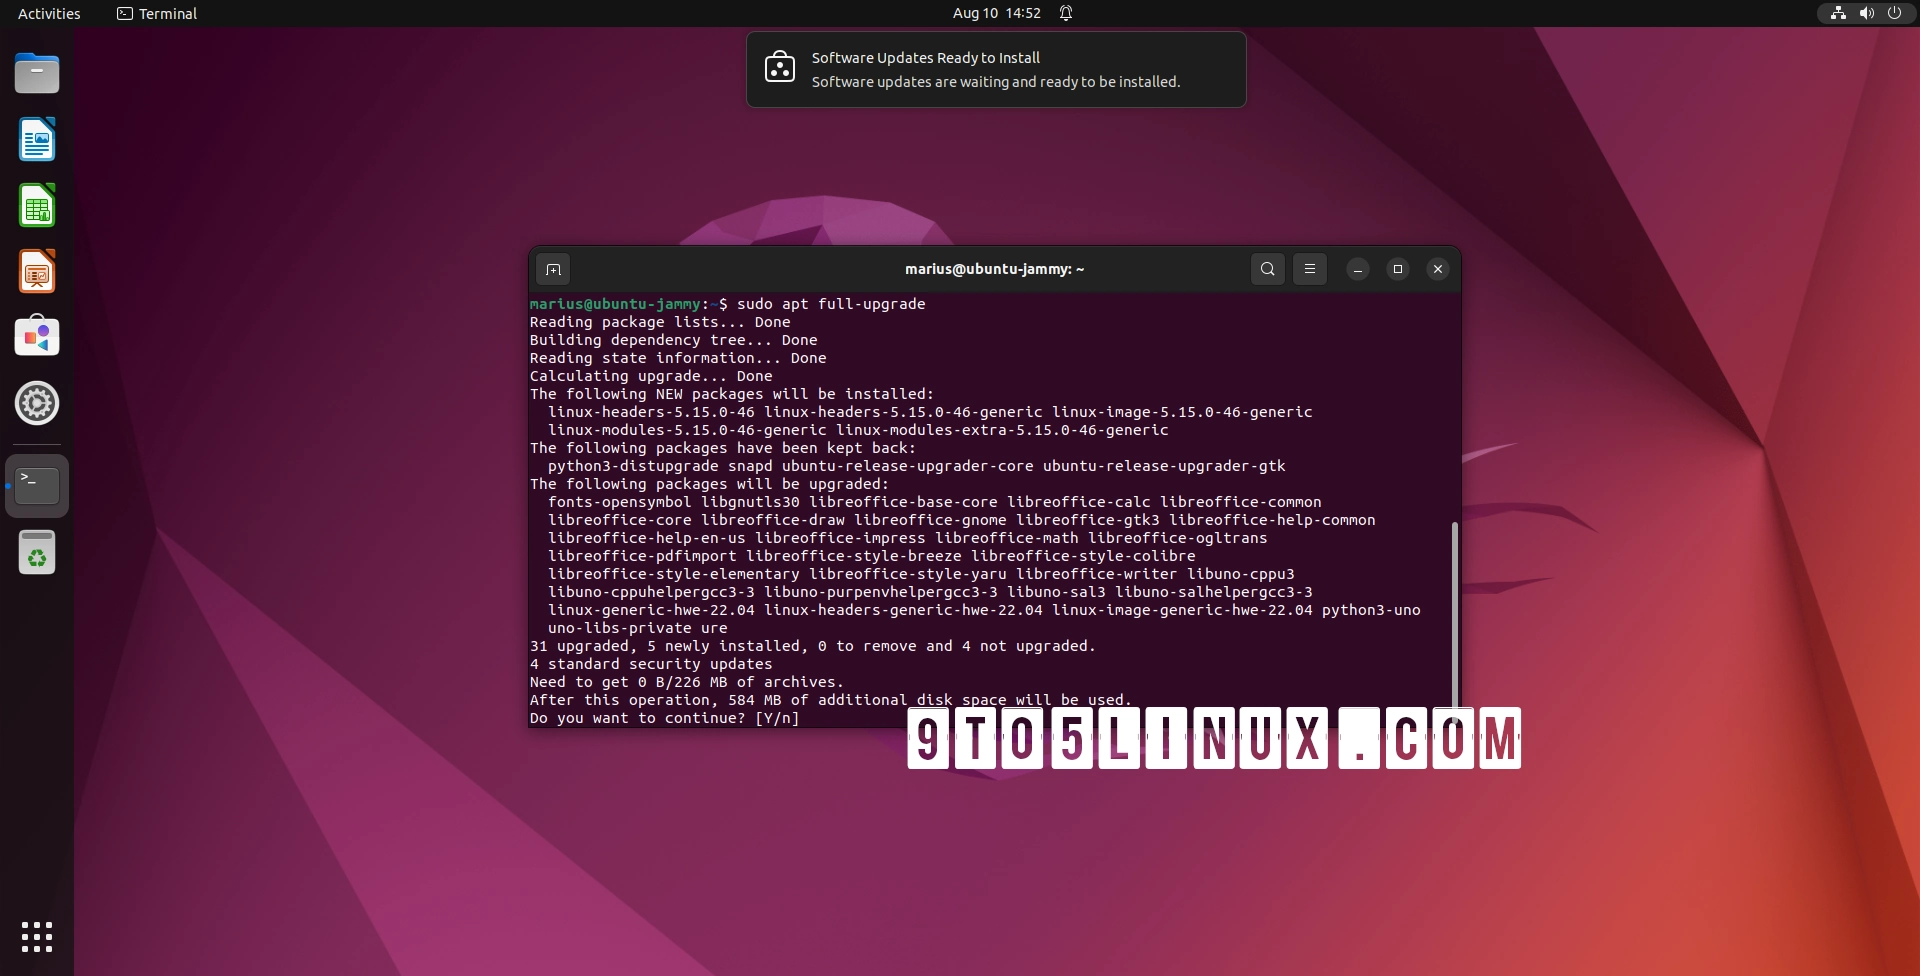 Ubuntu 22.04 and 20.04 LTS Users Receive New Kernel Updates, 8 Security Issues Fixed